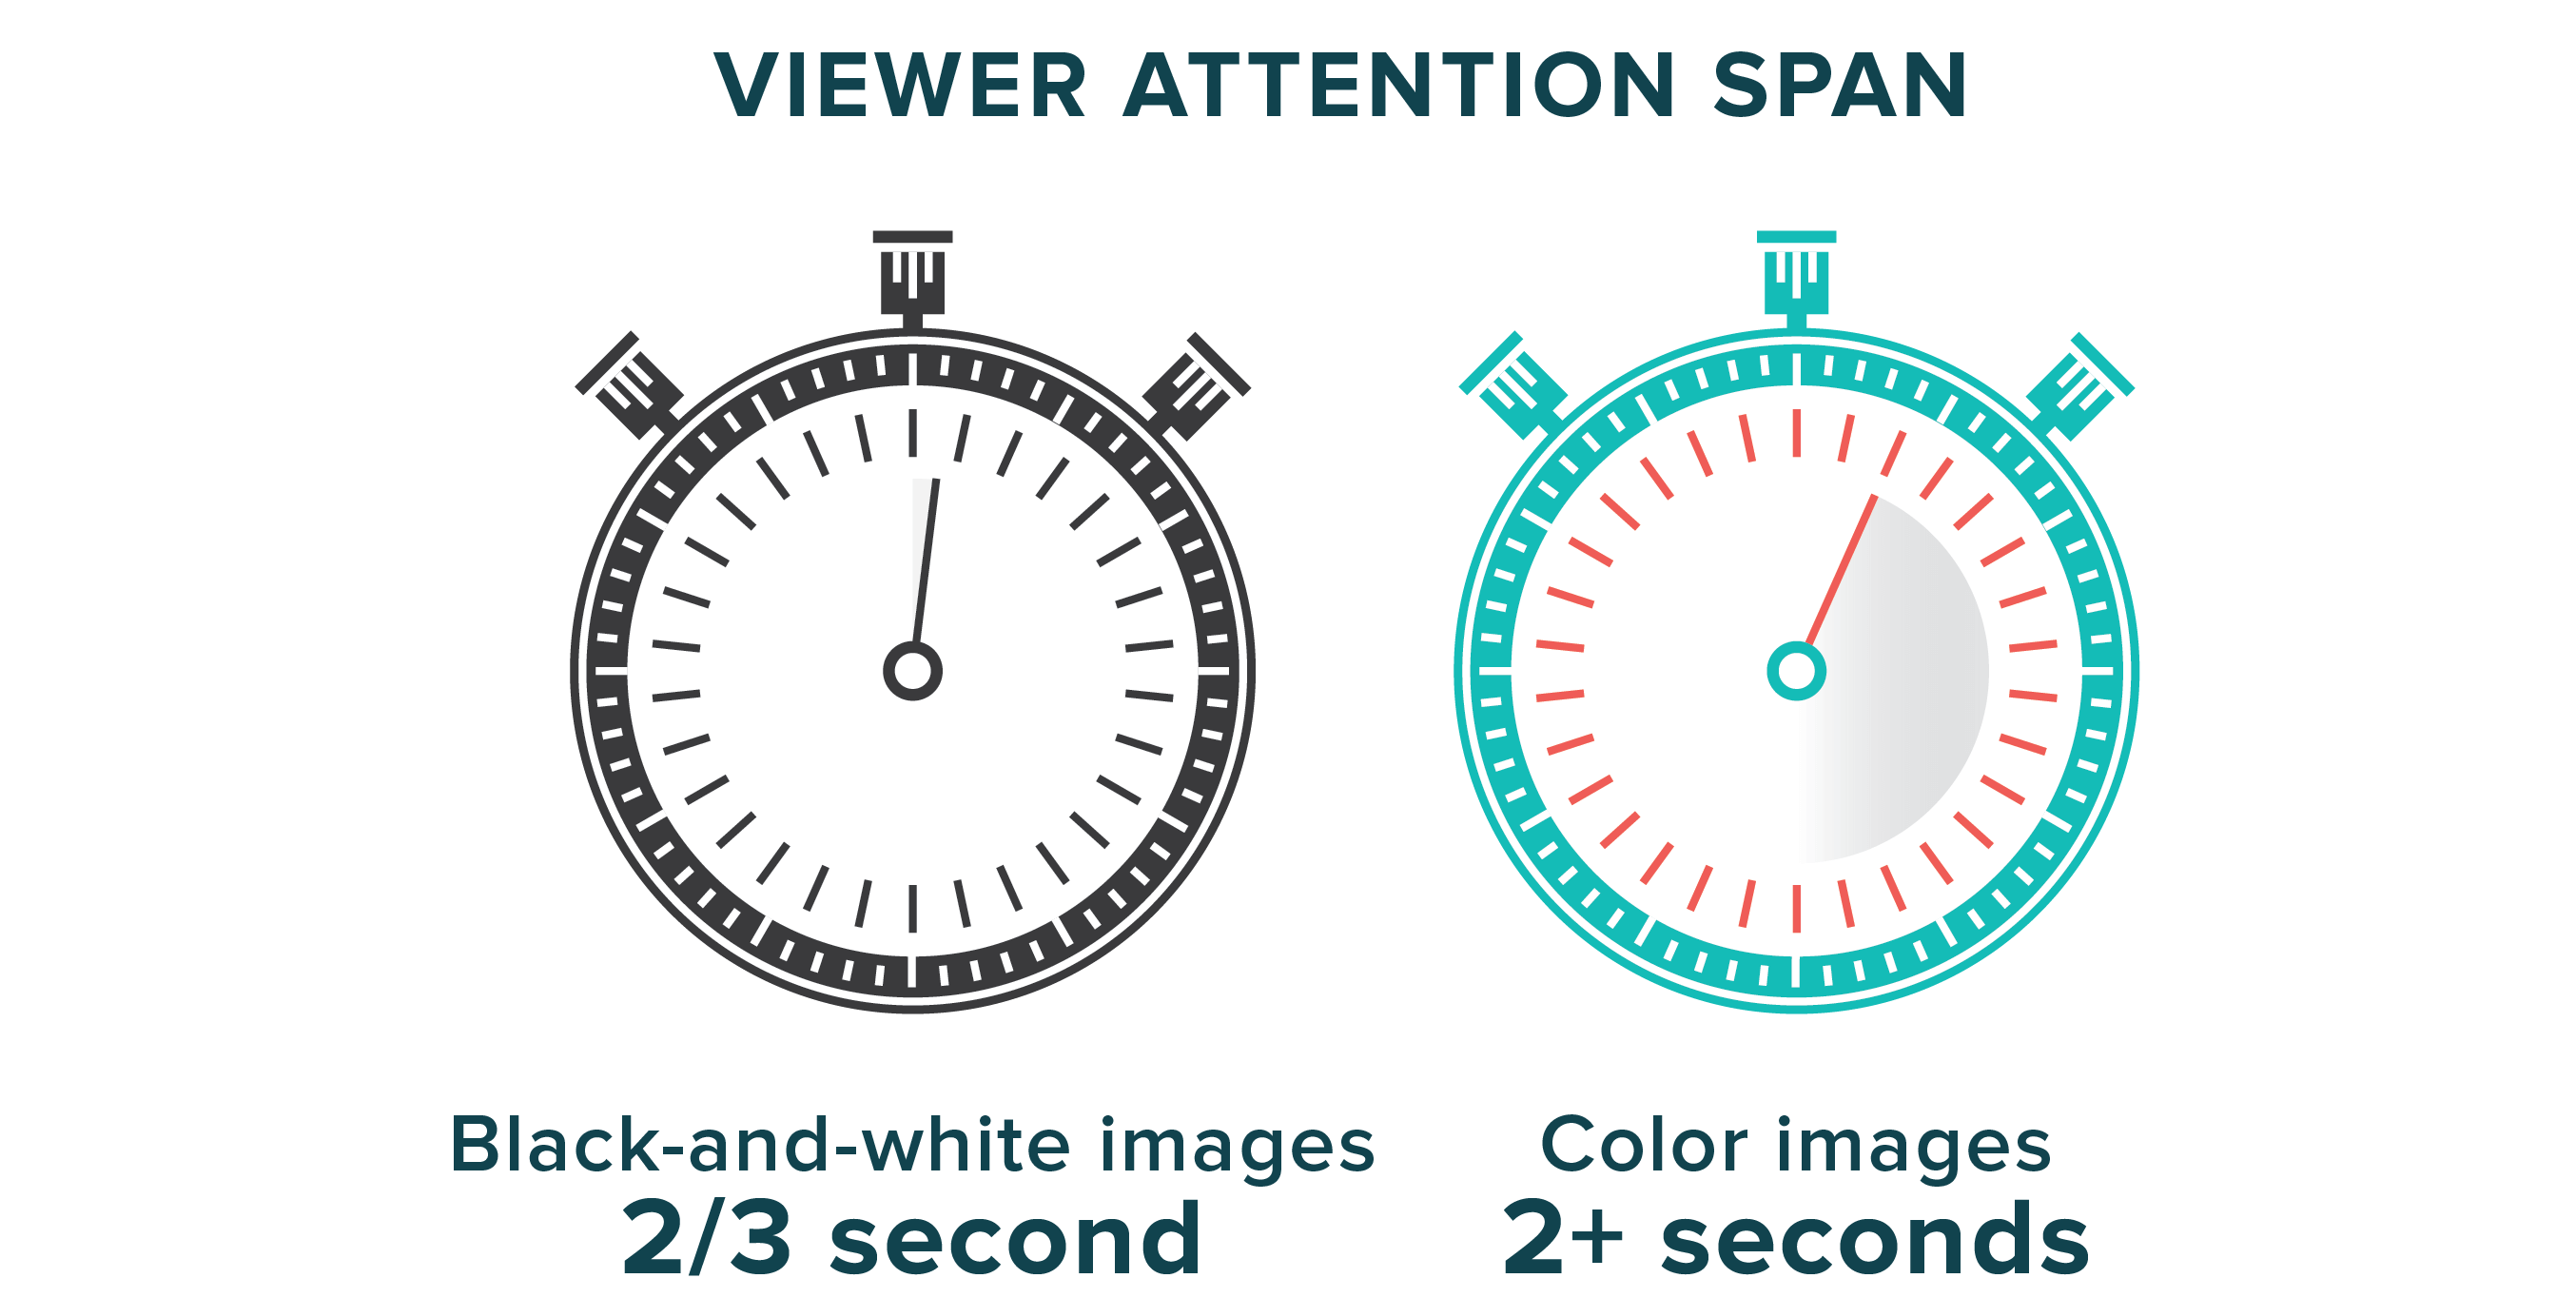 Attention spin. Attention span. Attention span перевод. Short attention span. What is attention span.